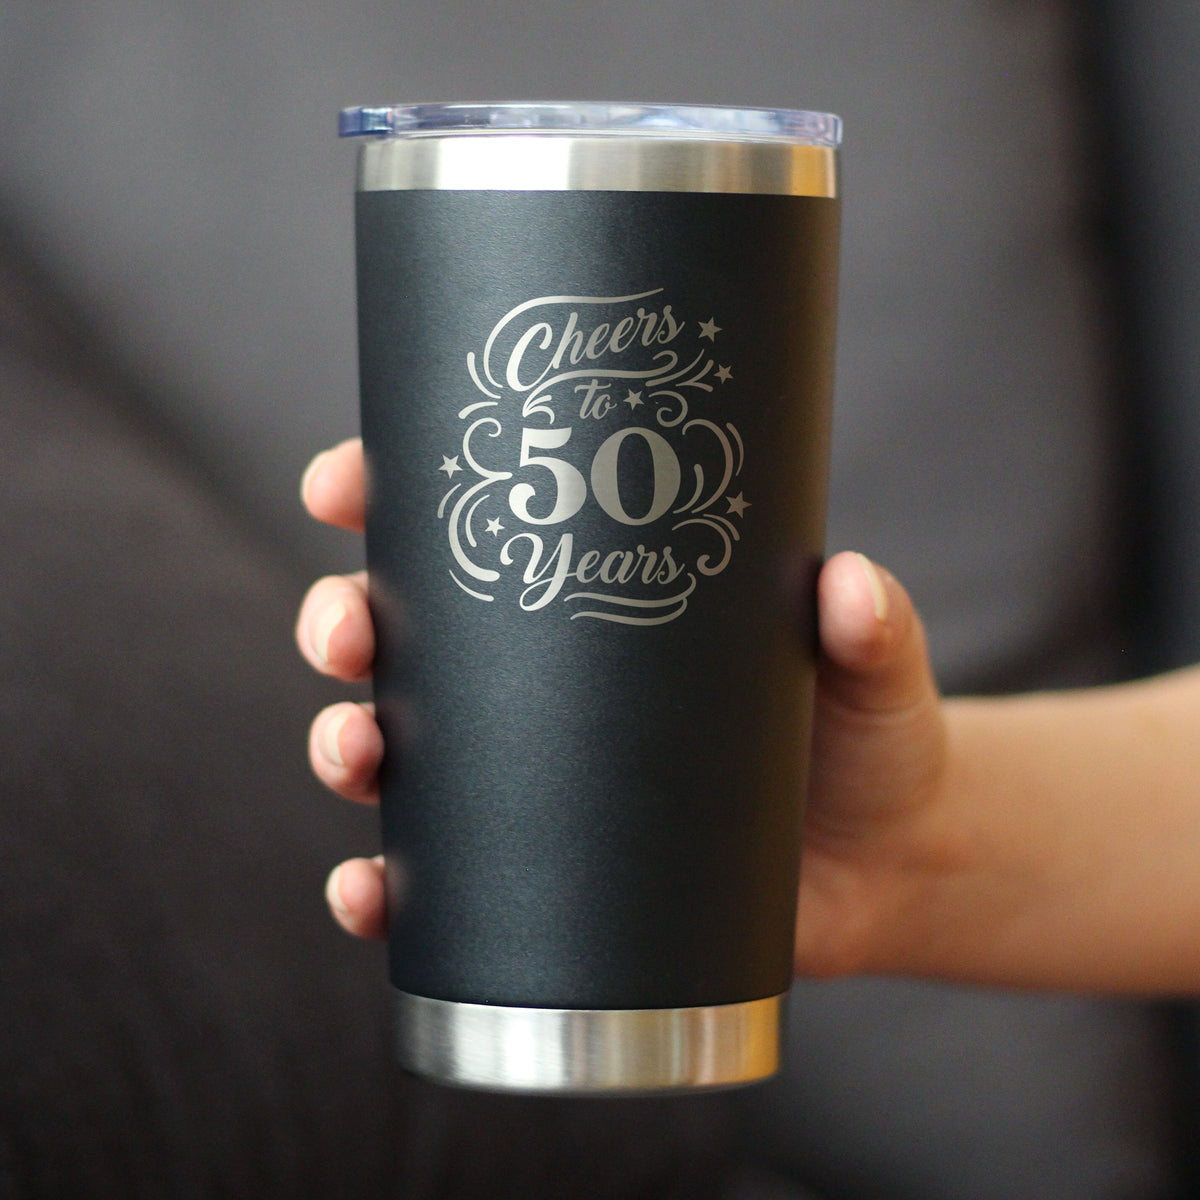 Cheers to 50 Years - Insulated Coffee Tumbler Cup with Sliding Lid - Stainless Steel Insulated Mug - 50th Anniversary Gifts and Party Decor